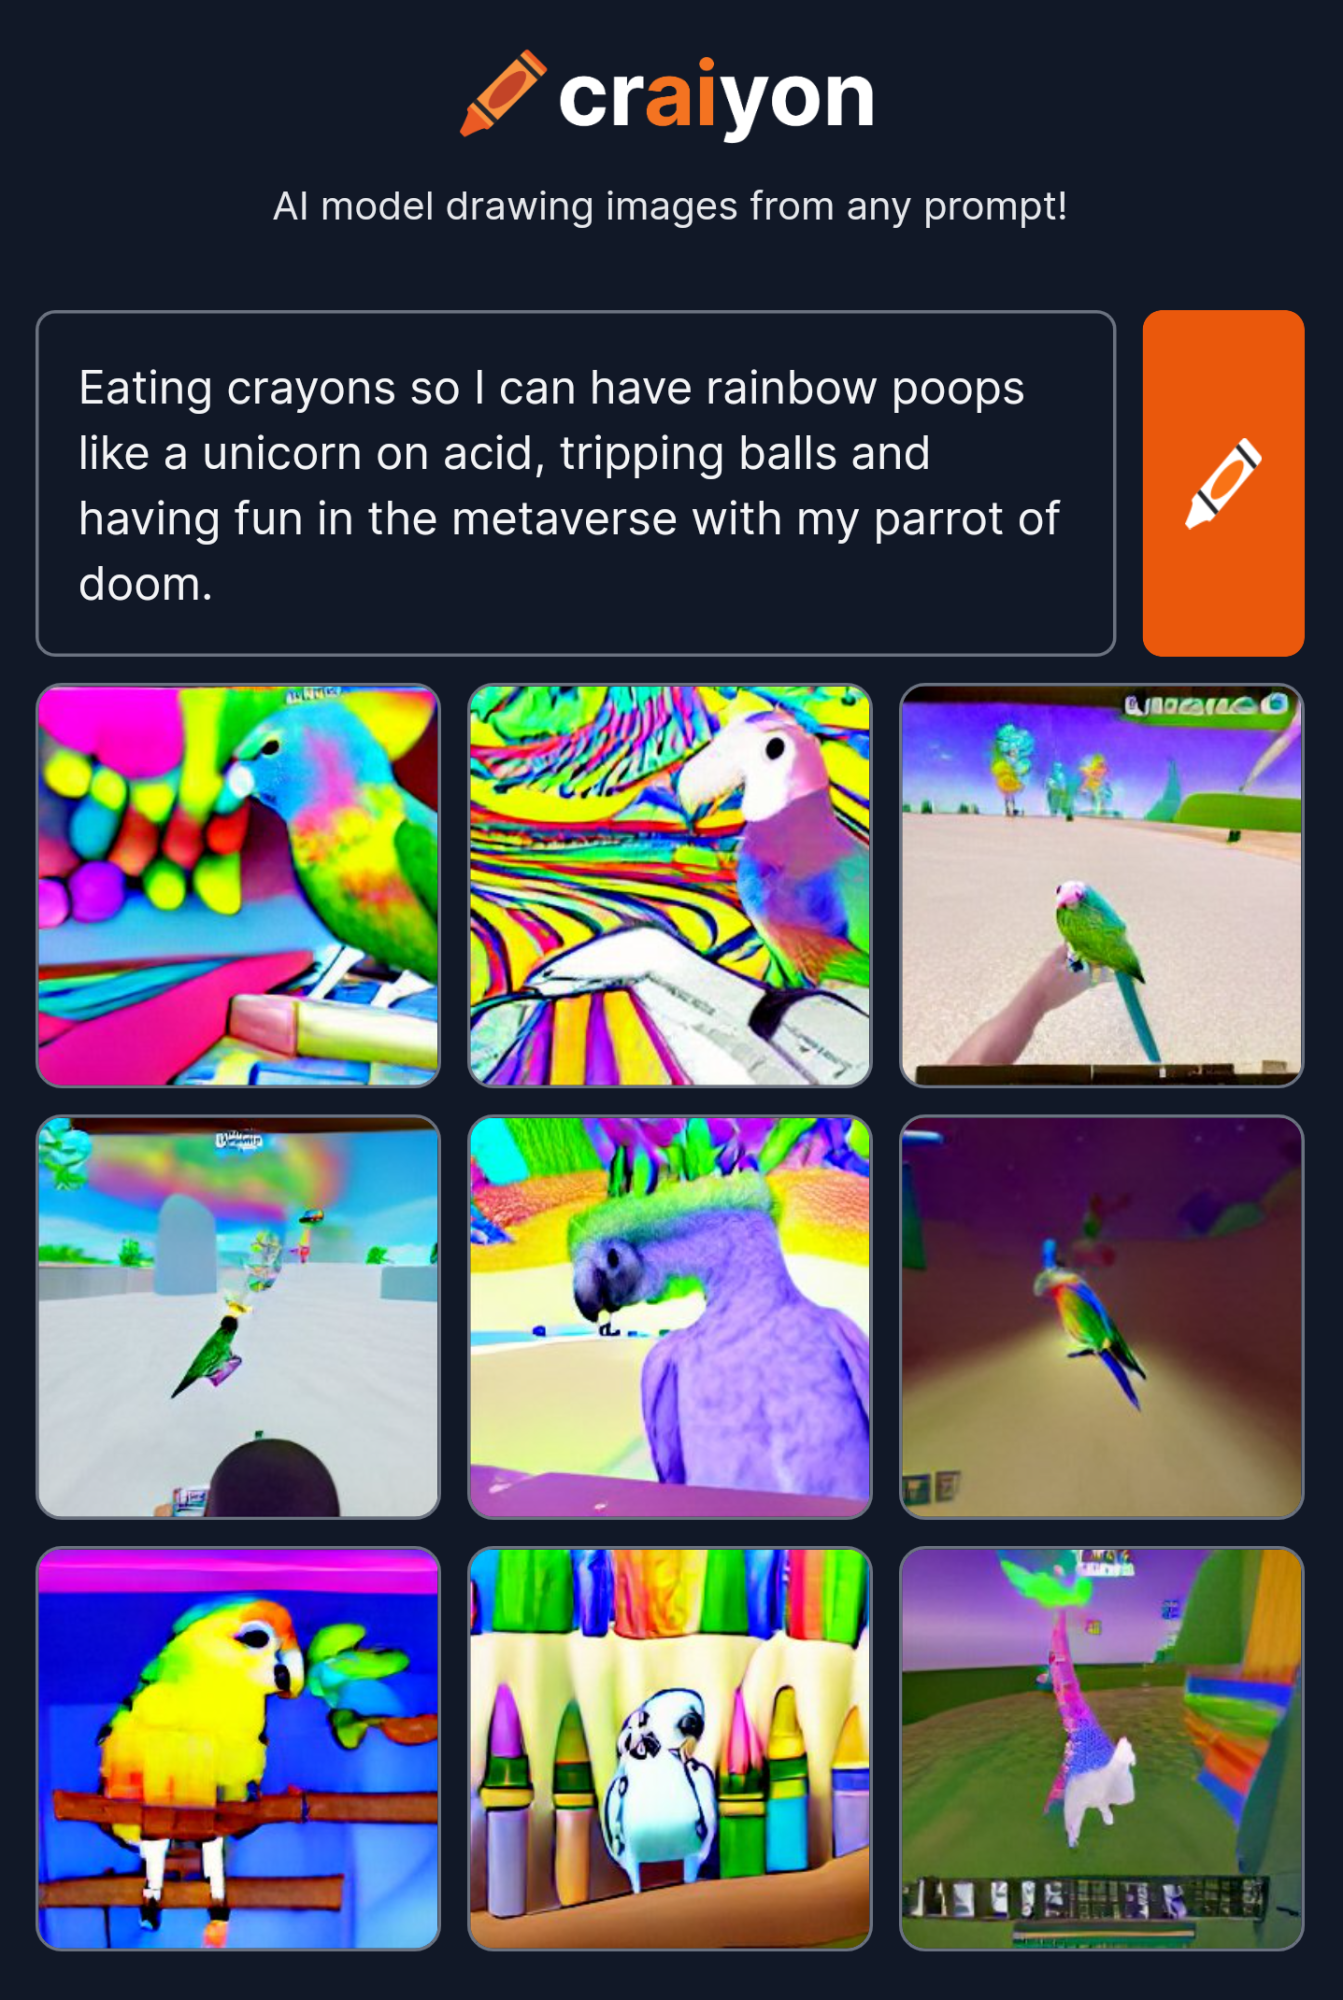 craiyon_204415_Eating_crayons_so_I_can_have_rainbow_poops_like_a_unicorn_on_acid__tripping_bal...png